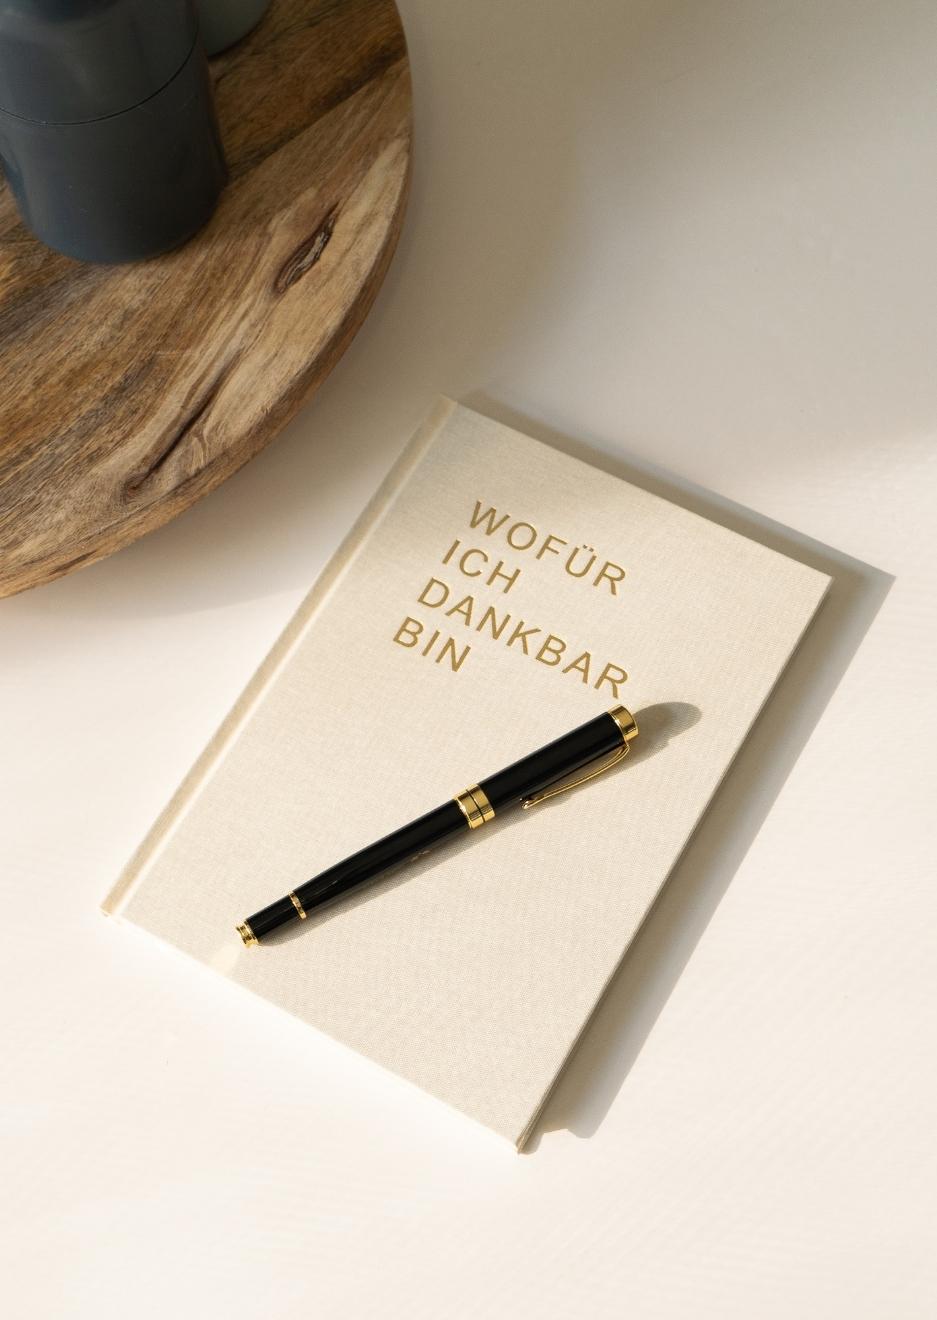 How to Start a Gratitude Journal - The Goulet Pen Company